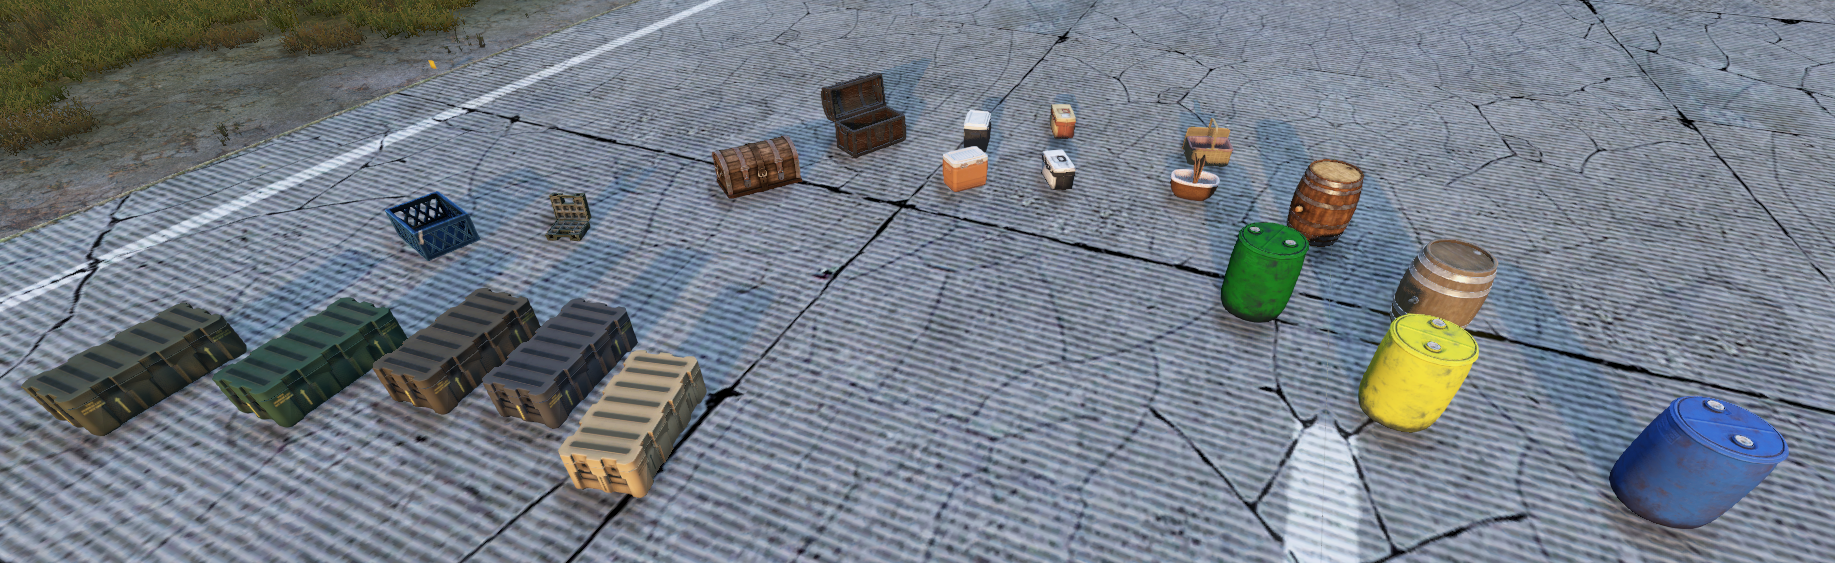 crates_barrels_and_other_storage.png